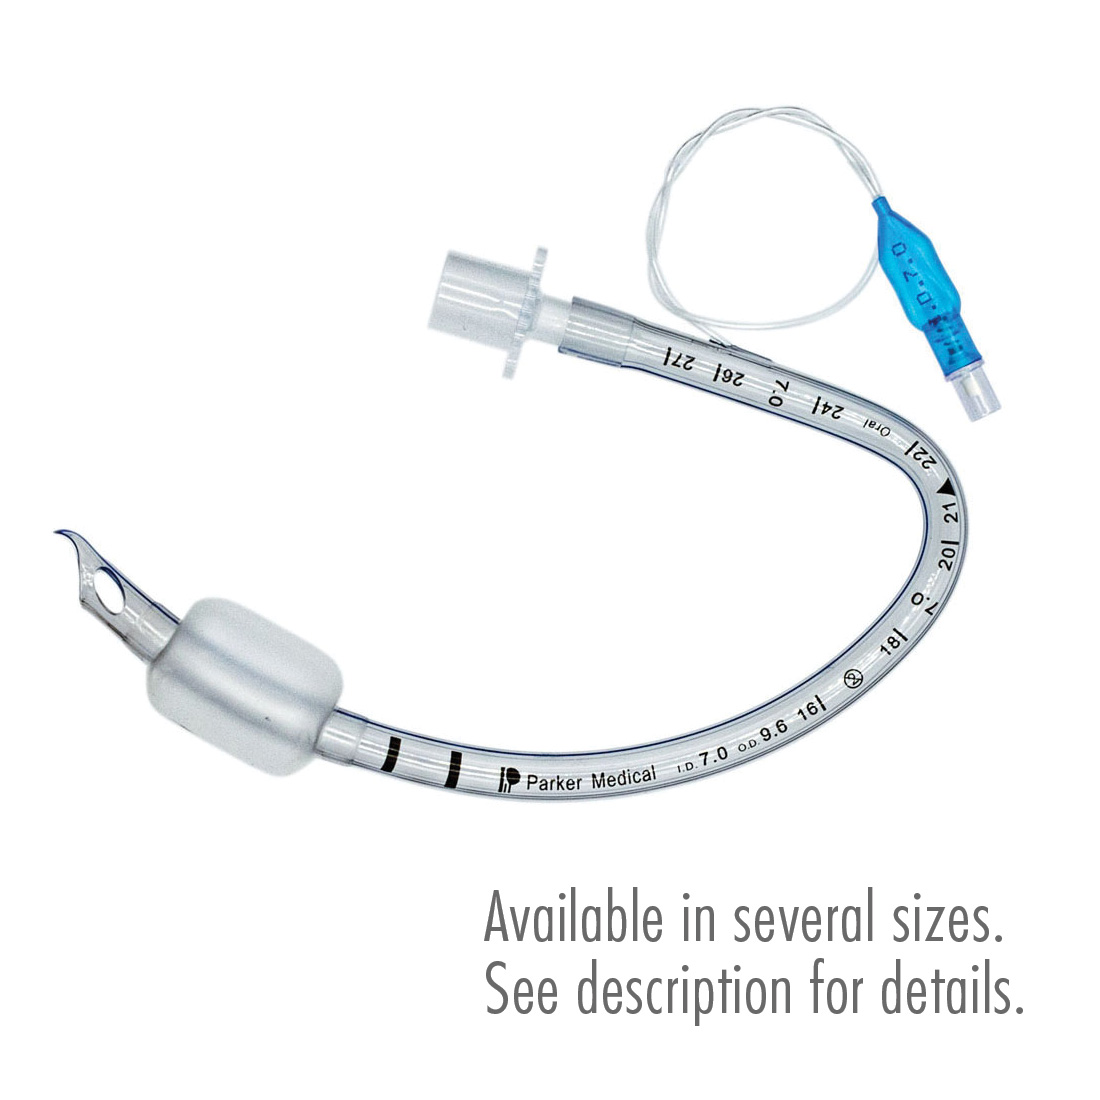 Parker Flex-Tip Endo Tube Performed, Oral Cuffed 7.5